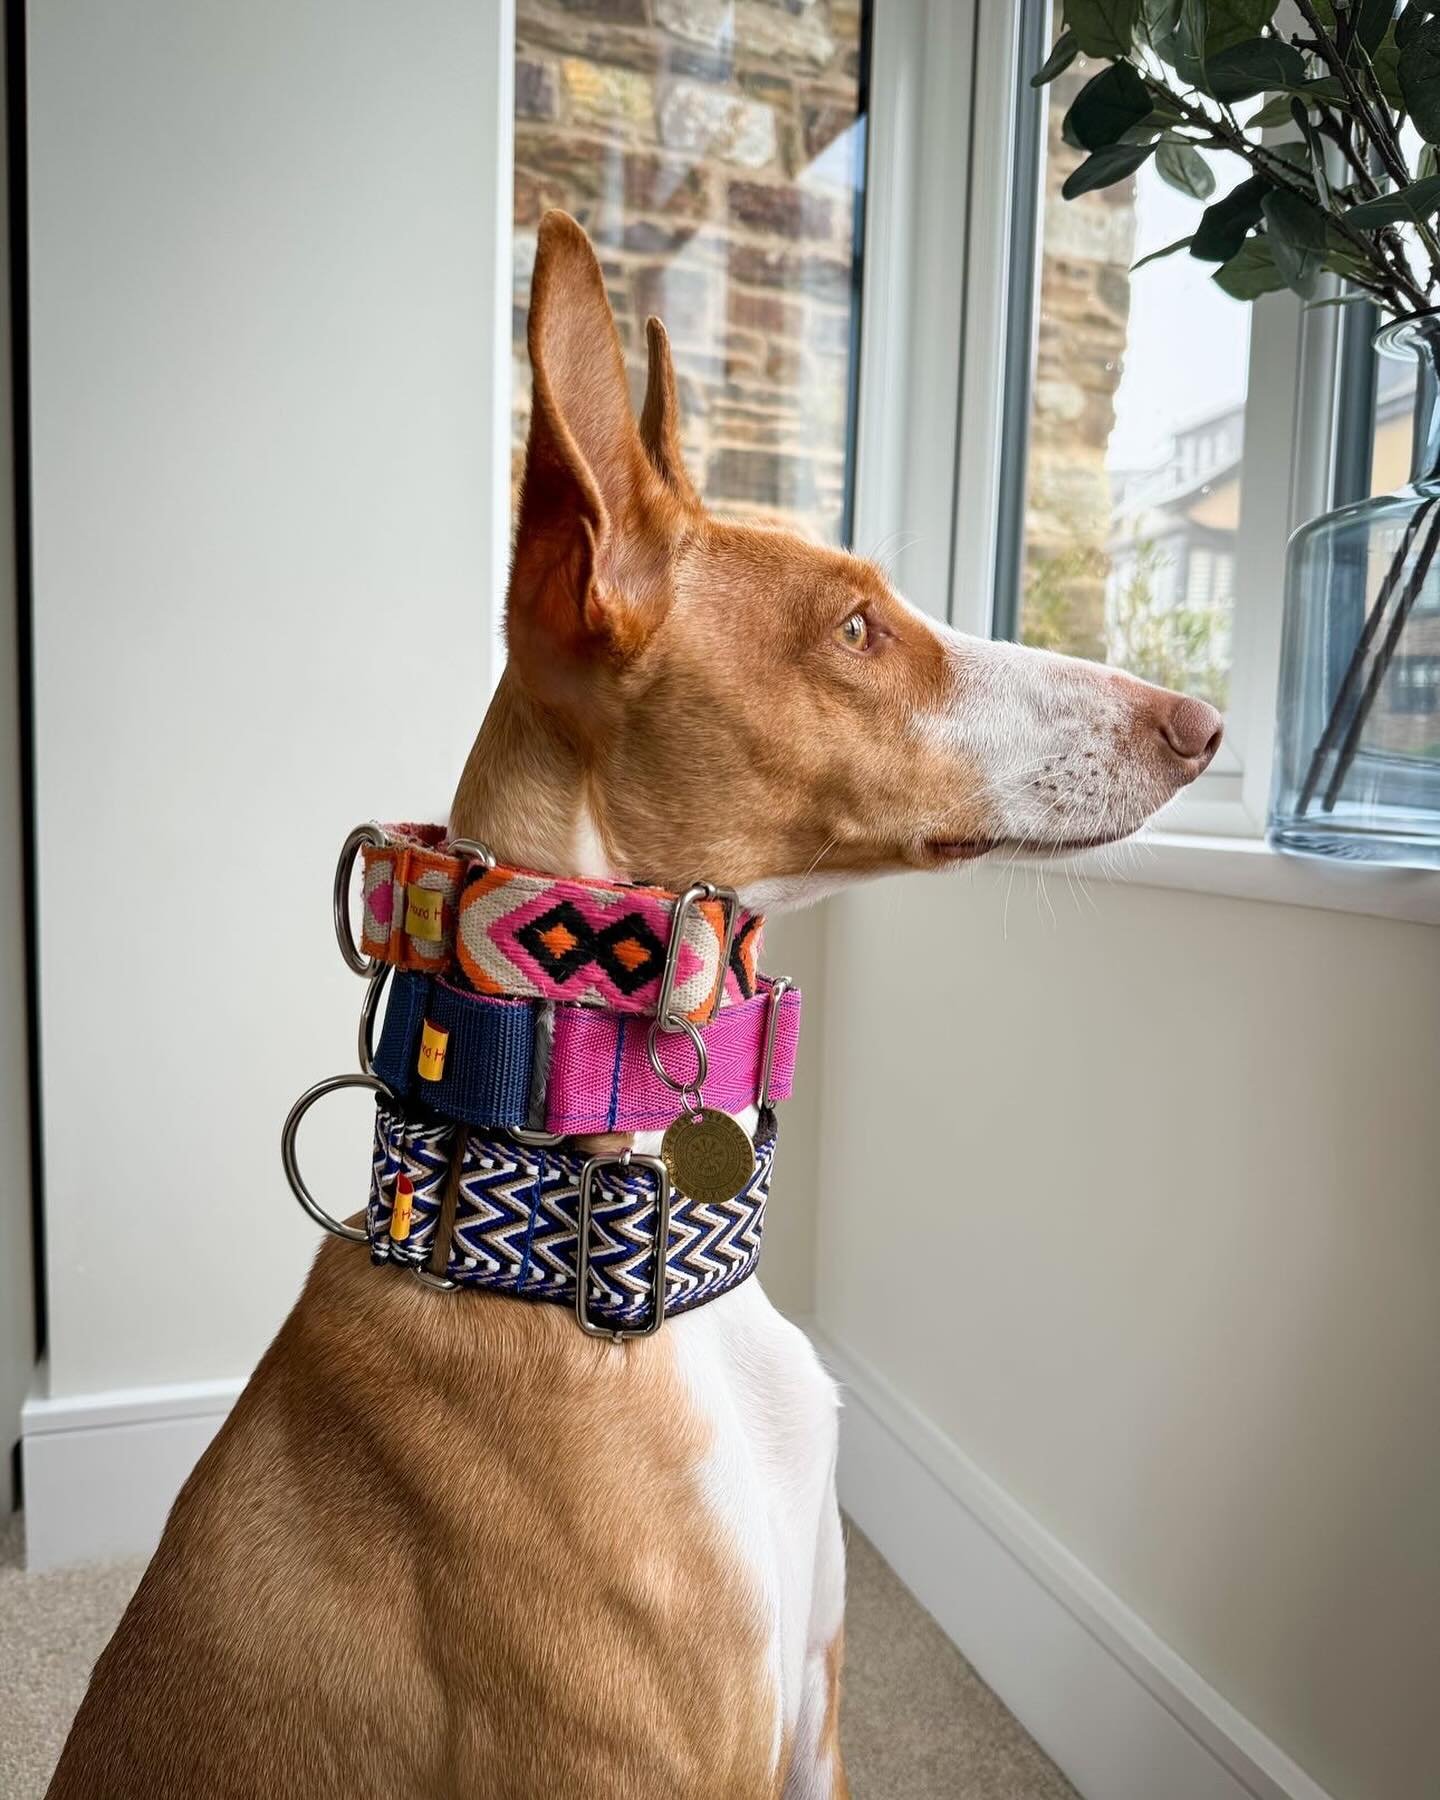 How many HHC collars can you fit on your neck? 🤔 

@podencohera smashed the challenge with 3 stunning martingales - doesn&rsquo;t she have a beautiful collection? 😍

If you give it a go, remember to tag me!!

We&rsquo;ve added lots of new options o